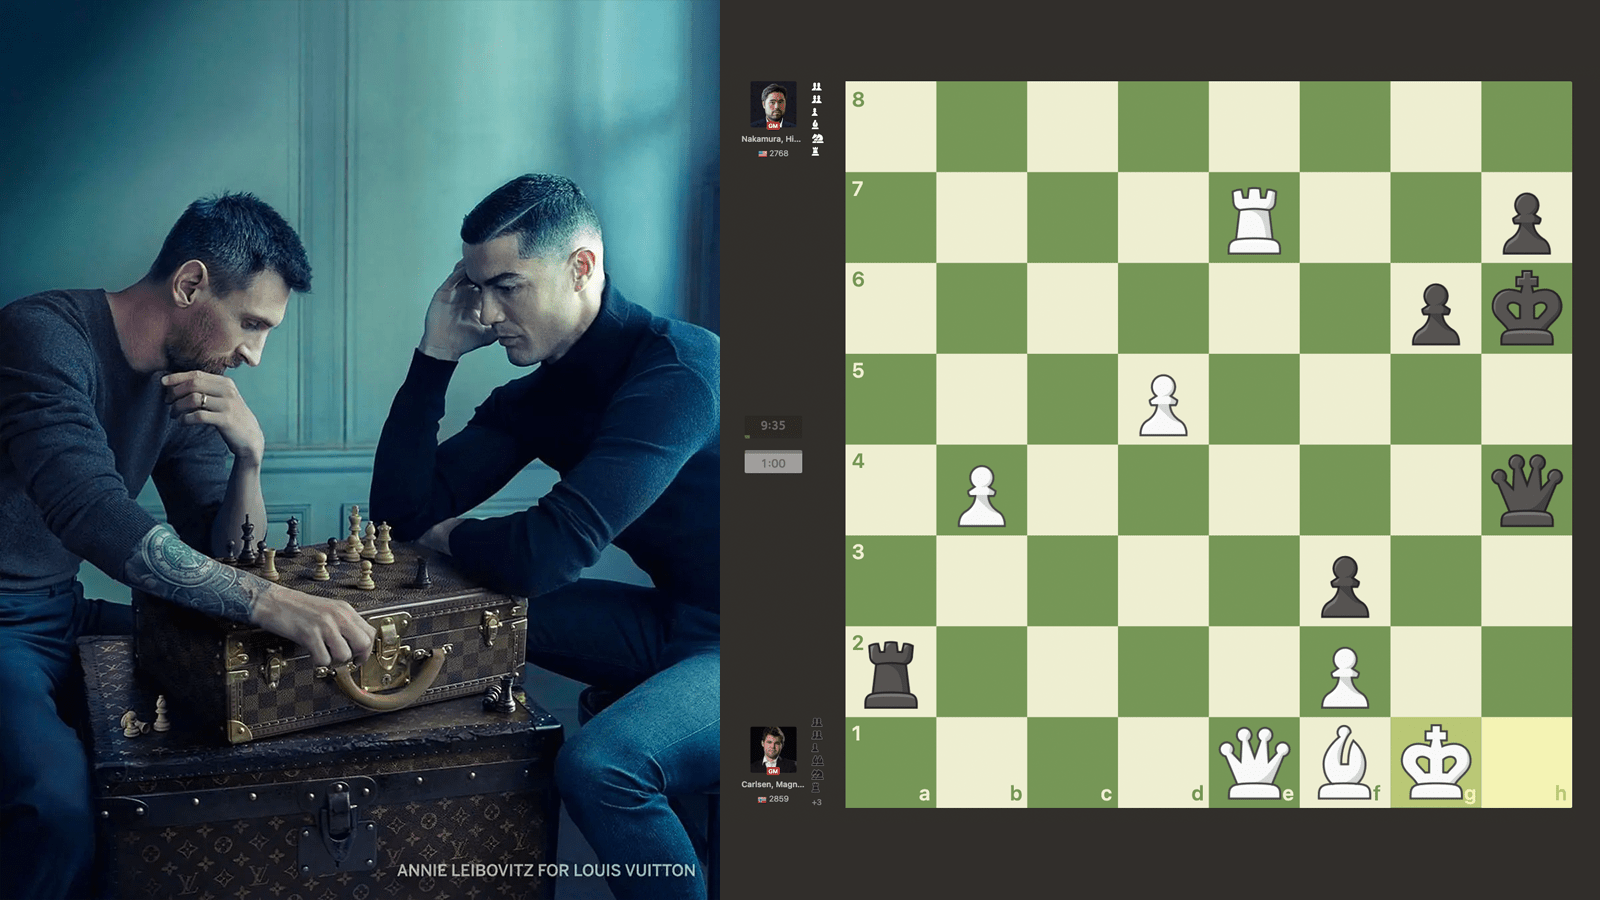 Messi, Ronaldo Play Chess In Louis Vuitton Campaign (And The Position Is Real)